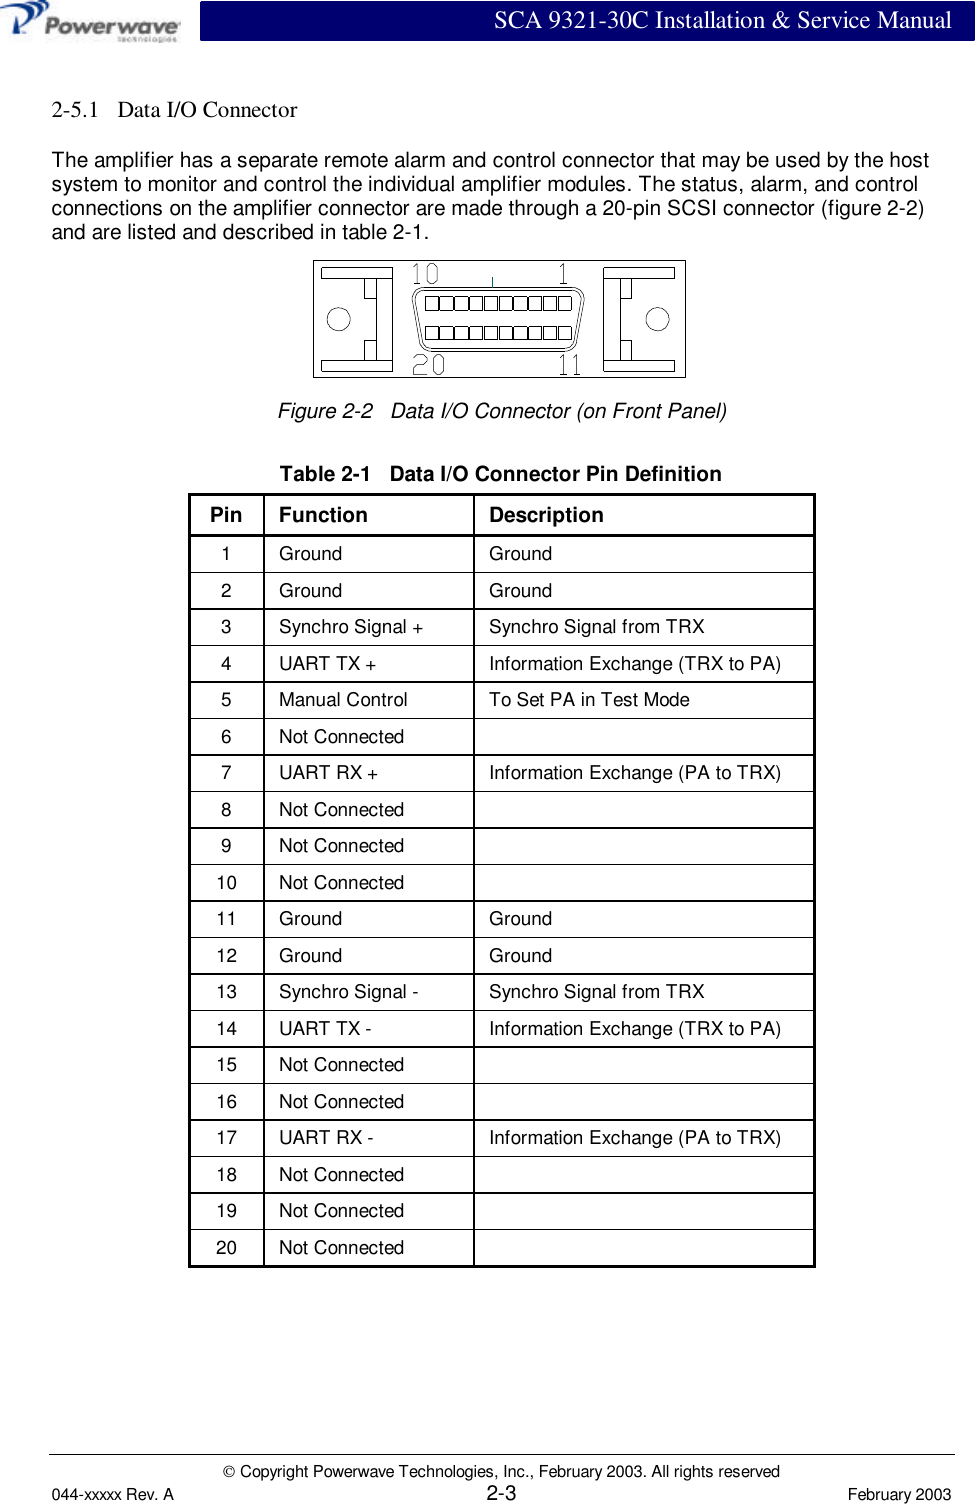 SCA 9321-30C Installation &amp; Service Manual Copyright Powerwave Technologies, Inc., February 2003. All rights reserved044-xxxxx Rev. A2-3February 20032-5.1   Data I/O ConnectorThe amplifier has a separate remote alarm and control connector that may be used by the hostsystem to monitor and control the individual amplifier modules. The status, alarm, and controlconnections on the amplifier connector are made through a 20-pin SCSI connector (figure 2-2)and are listed and described in table 2-1.Figure 2-2   Data I/O Connector (on Front Panel)Table 2-1   Data I/O Connector Pin DefinitionPin Function Description1Ground Ground2Ground Ground3Synchro Signal + Synchro Signal from TRX4UART TX + Information Exchange (TRX to PA)5Manual Control To Set PA in Test Mode6Not Connected7UART RX + Information Exchange (PA to TRX)8Not Connected9Not Connected10 Not Connected11 Ground Ground12 Ground Ground13 Synchro Signal - Synchro Signal from TRX14 UART TX - Information Exchange (TRX to PA)15 Not Connected16 Not Connected17 UART RX - Information Exchange (PA to TRX)18 Not Connected19 Not Connected20 Not Connected